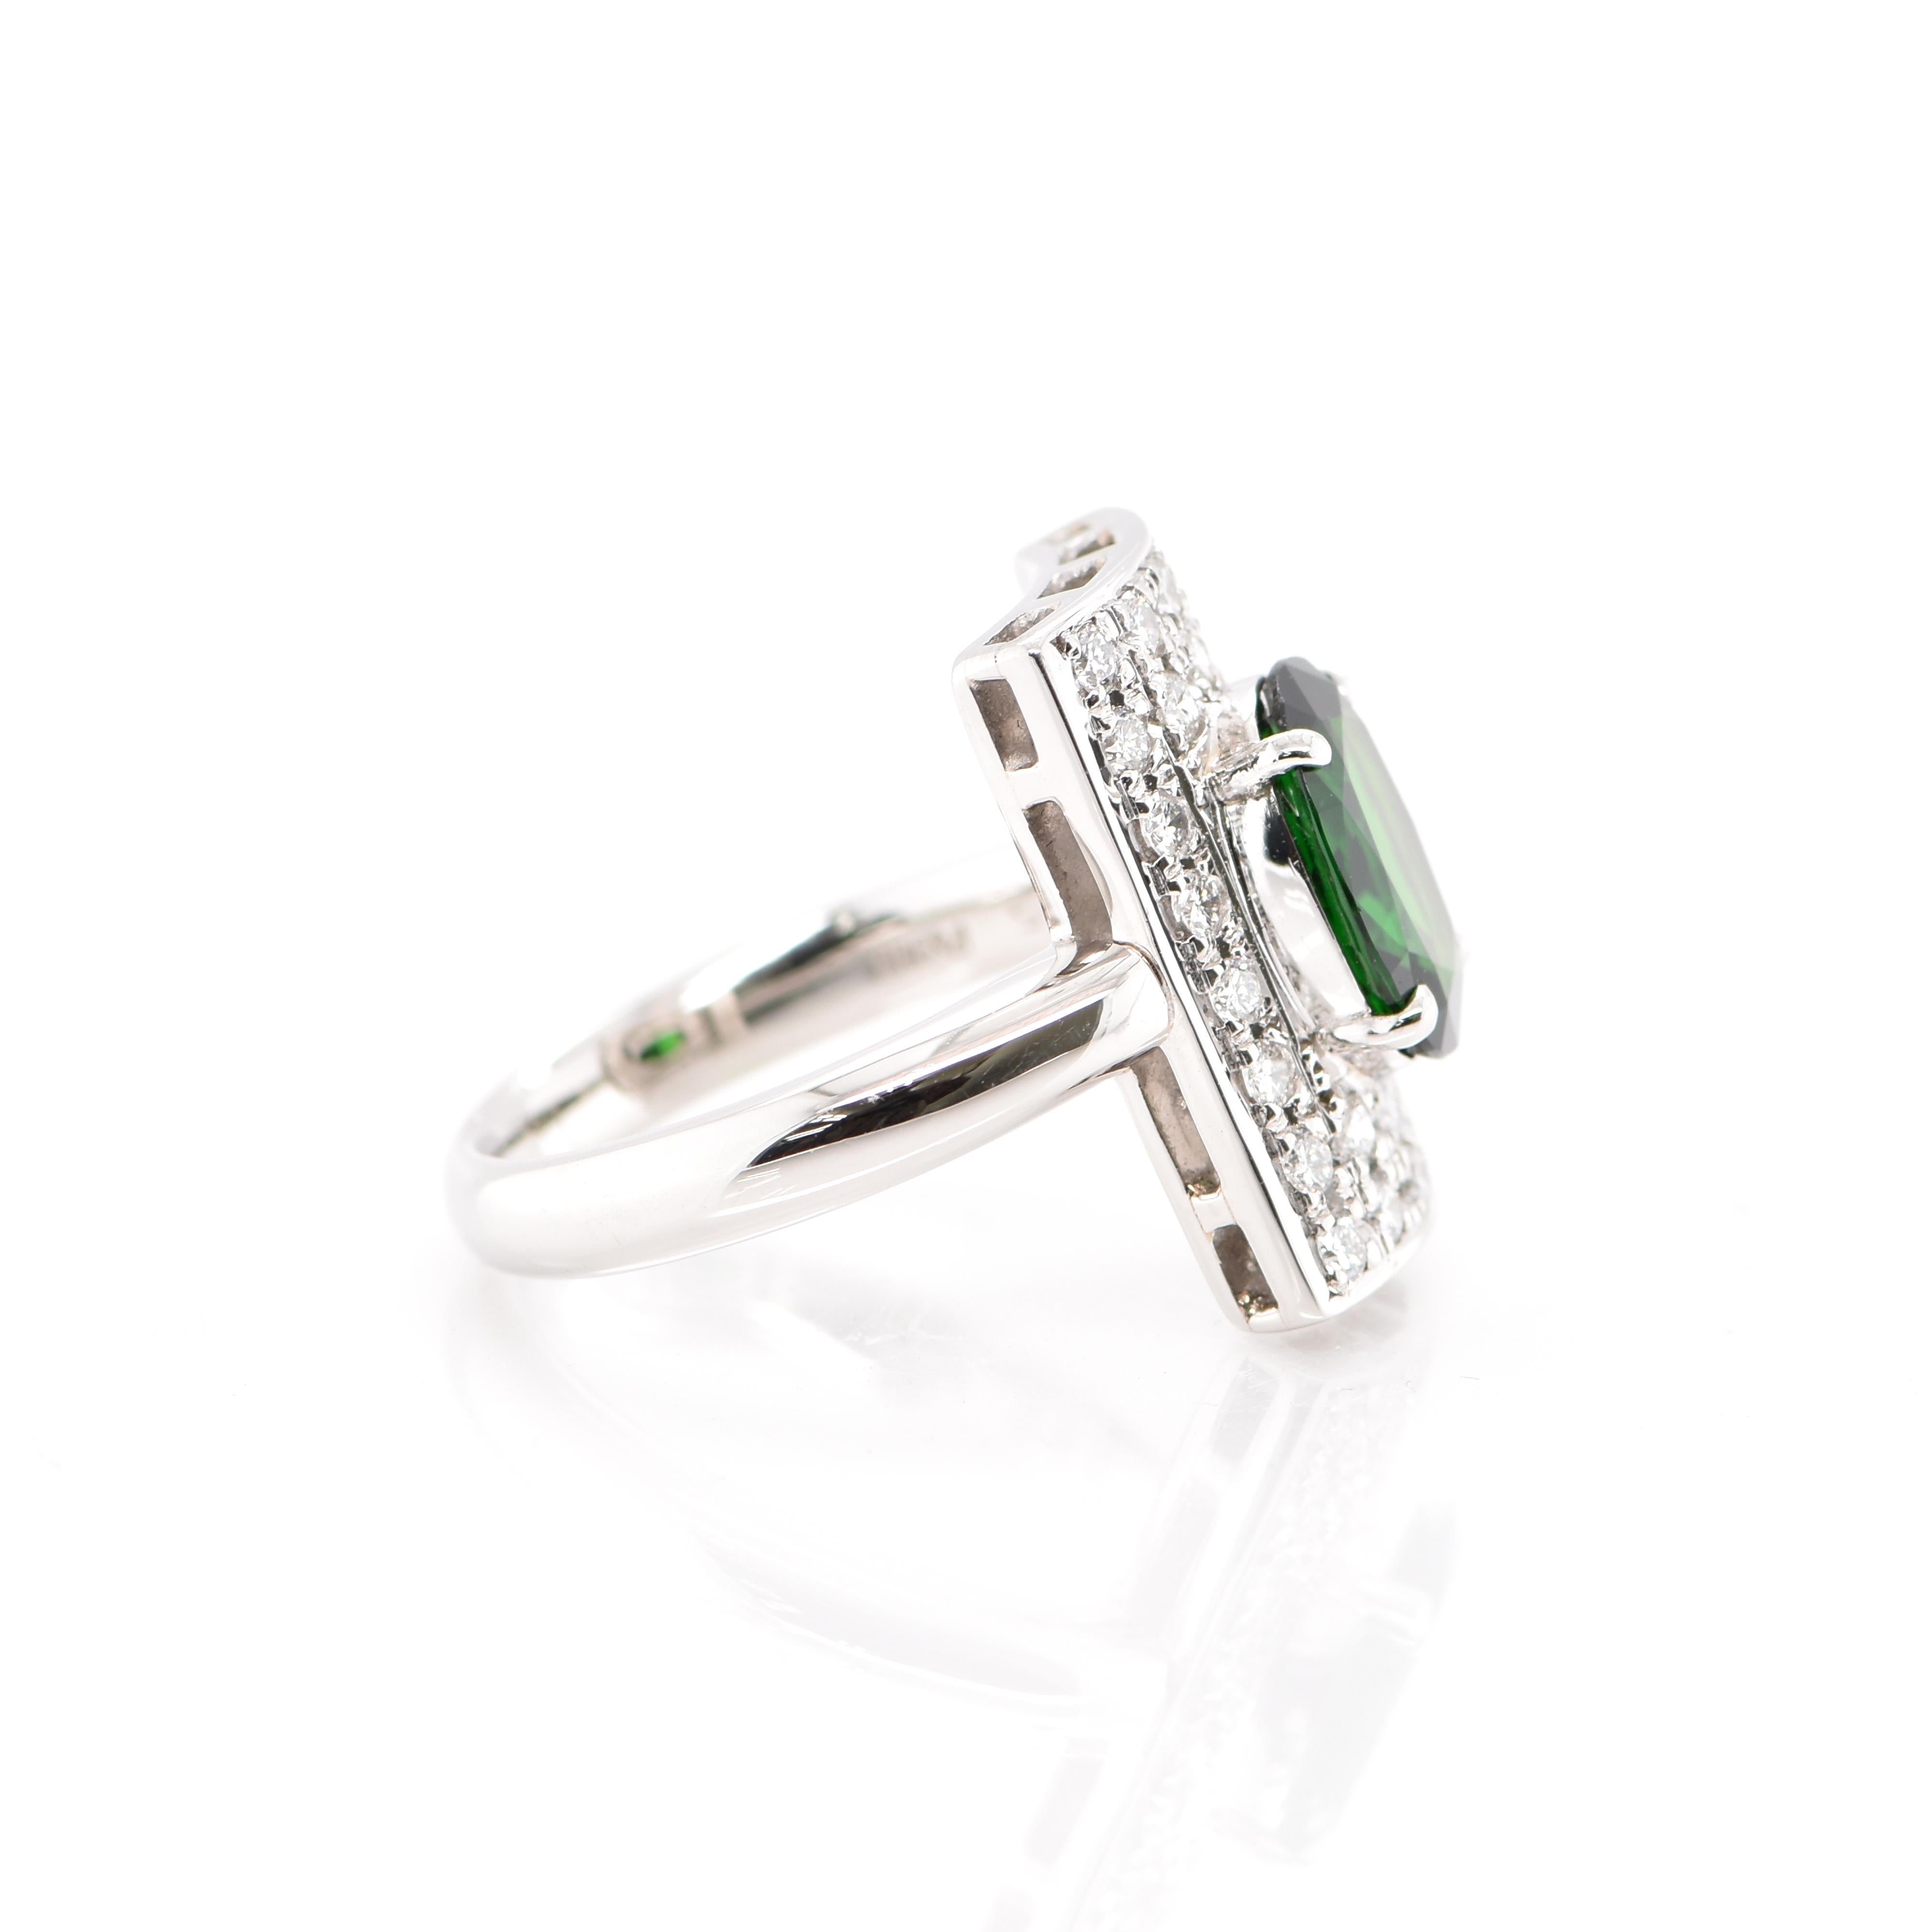 2.45 Carat Natural Tsavorite Garnet and Diamond Ring Set in Platinum In Excellent Condition For Sale In Tokyo, JP